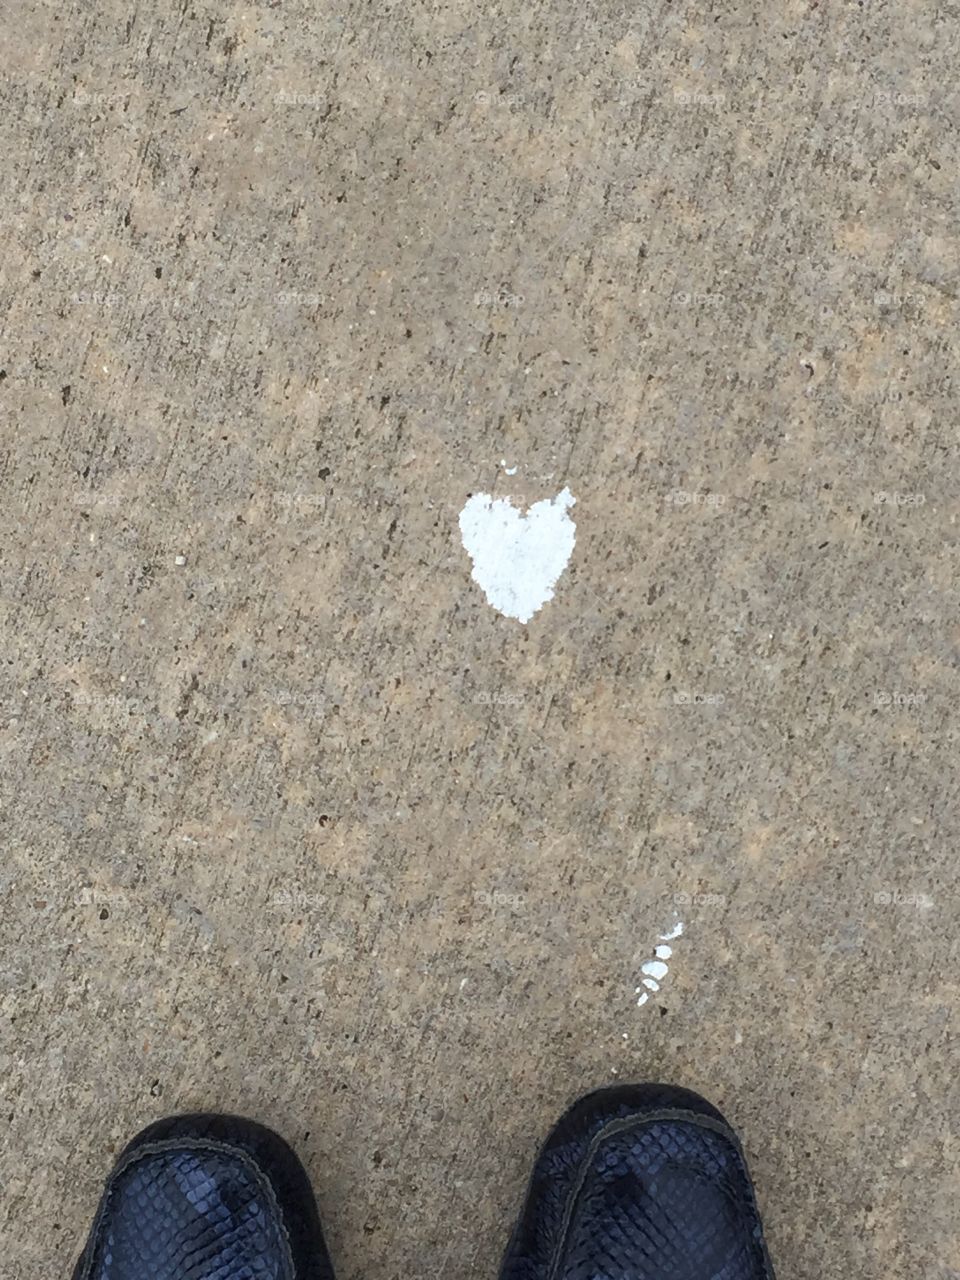 One week after my mom passed away and missing her, I found her in this white heart!